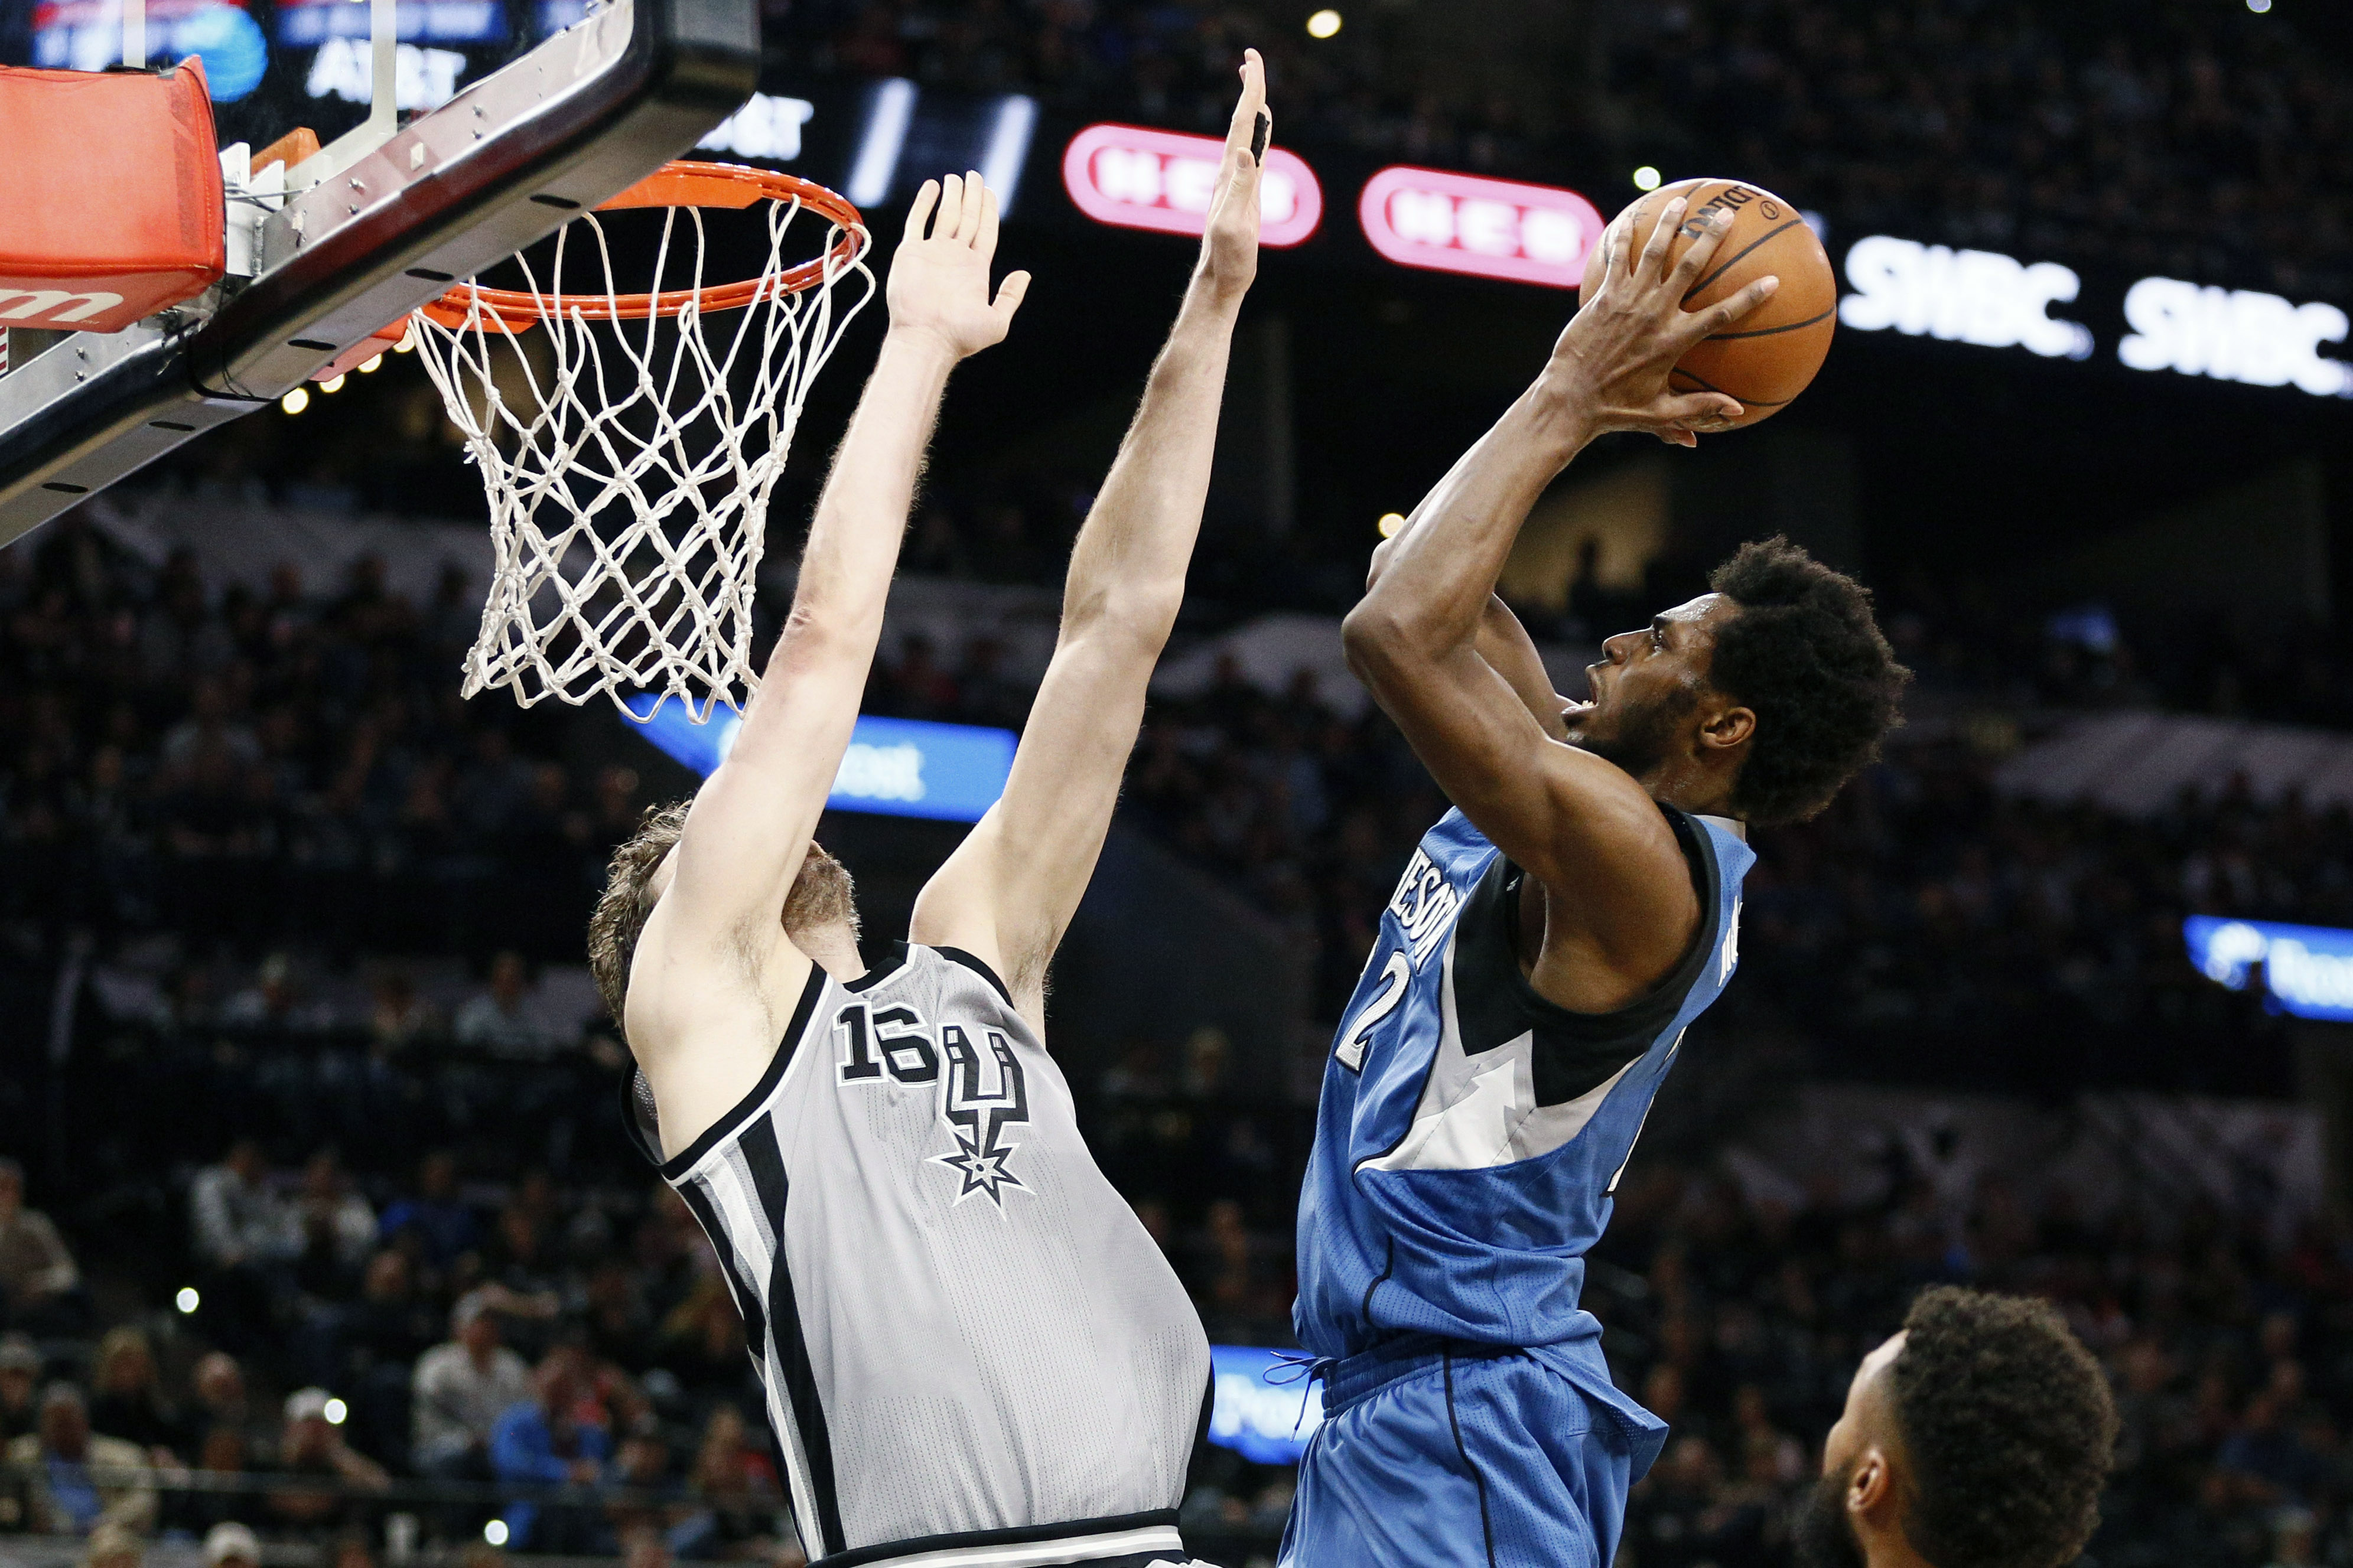 Spurs at Timberwolves live stream: How to watch online